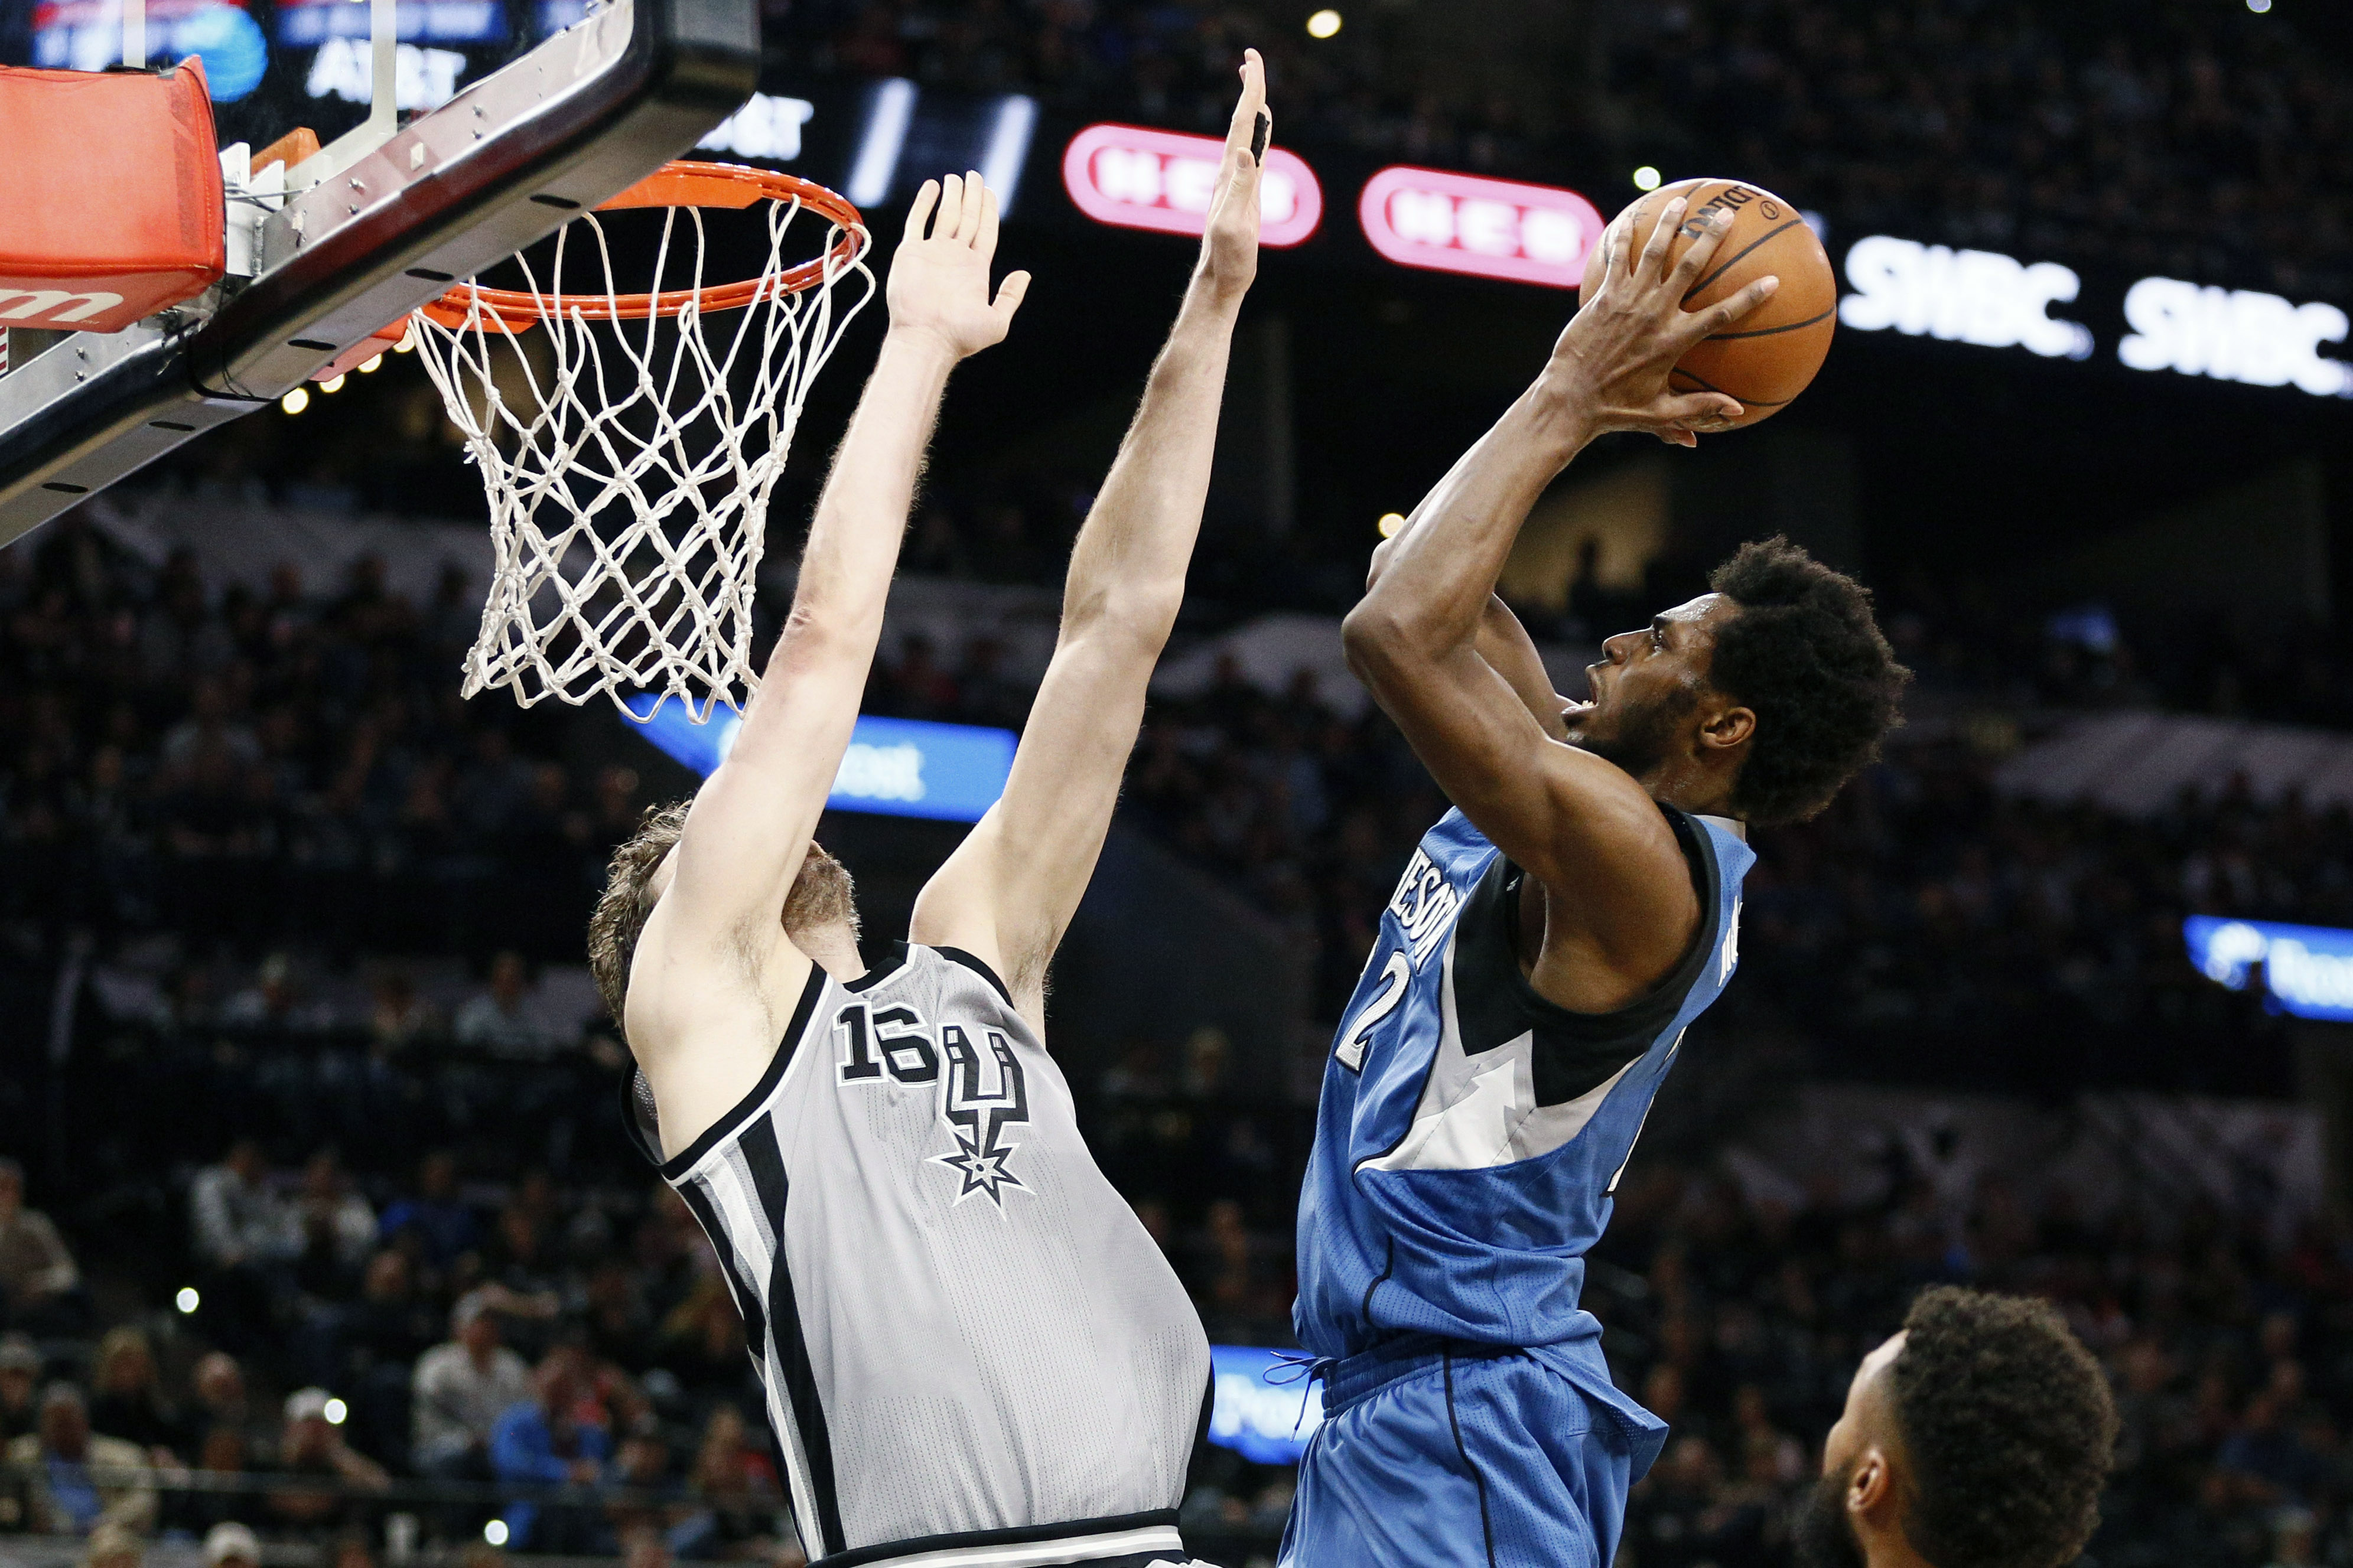 Spurs at Timberwolves live stream: How to watch online